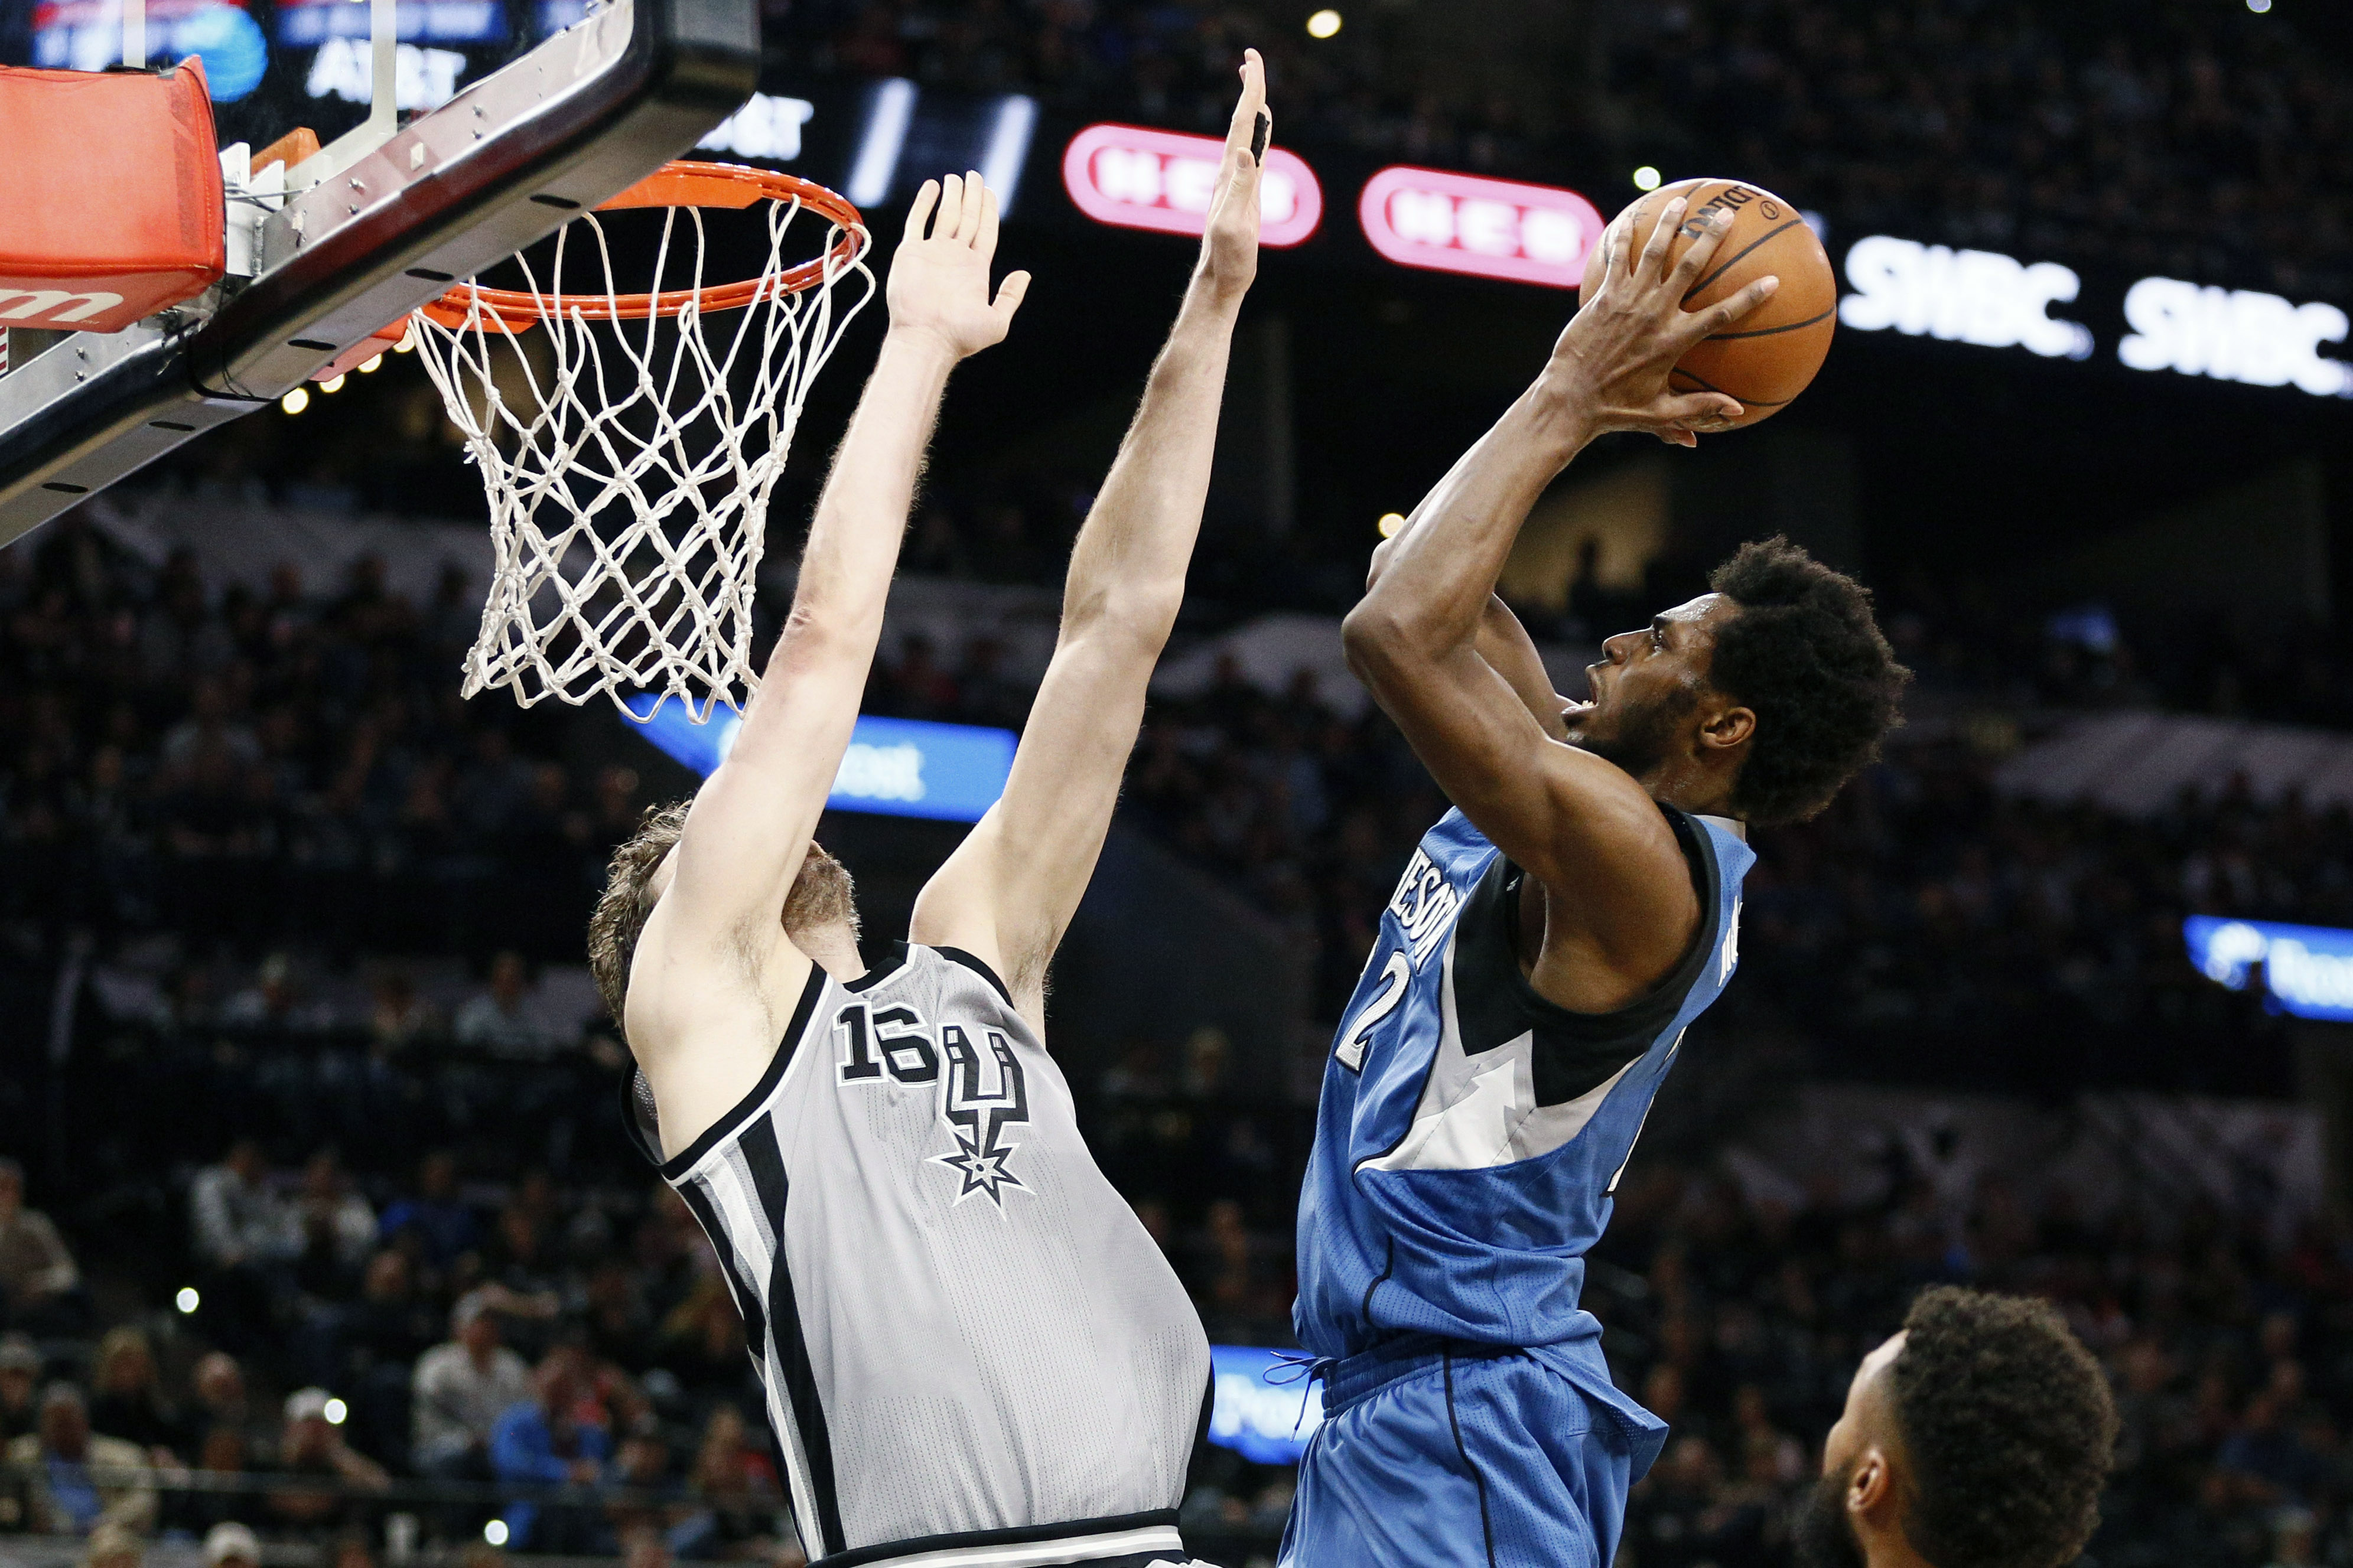 Spurs at Timberwolves live stream: How to watch online